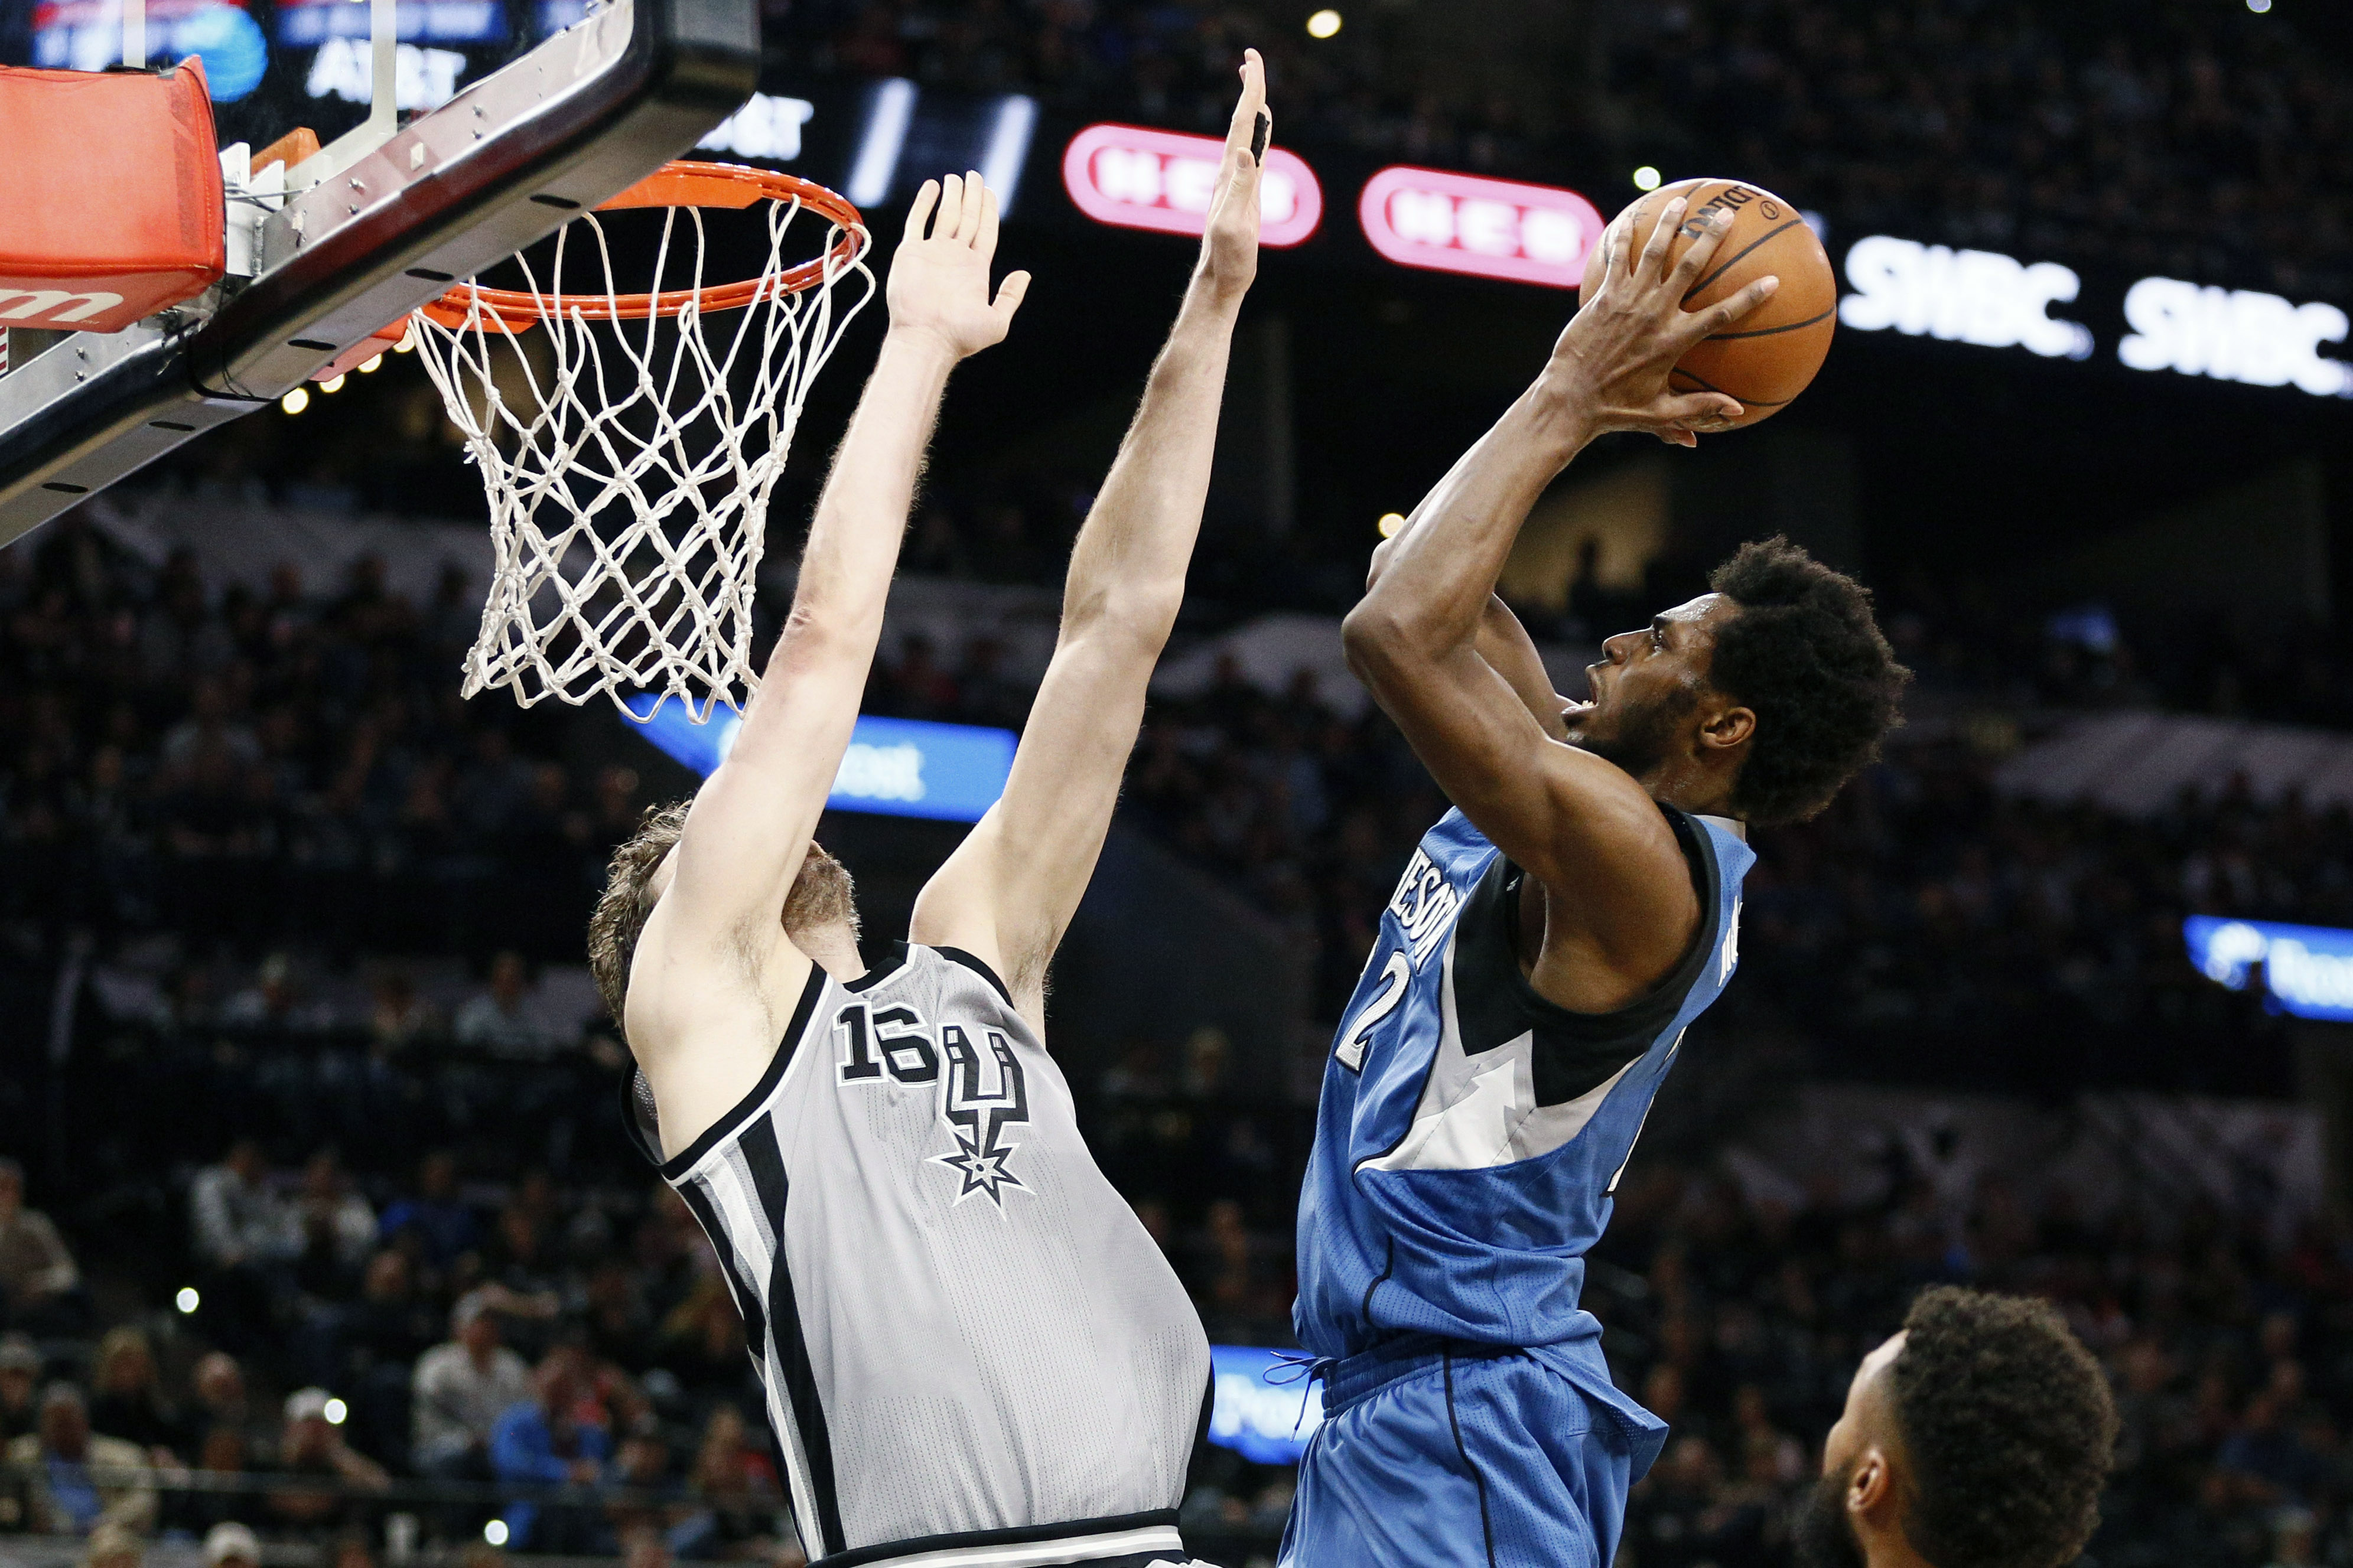 Spurs at Timberwolves live stream: How to watch online